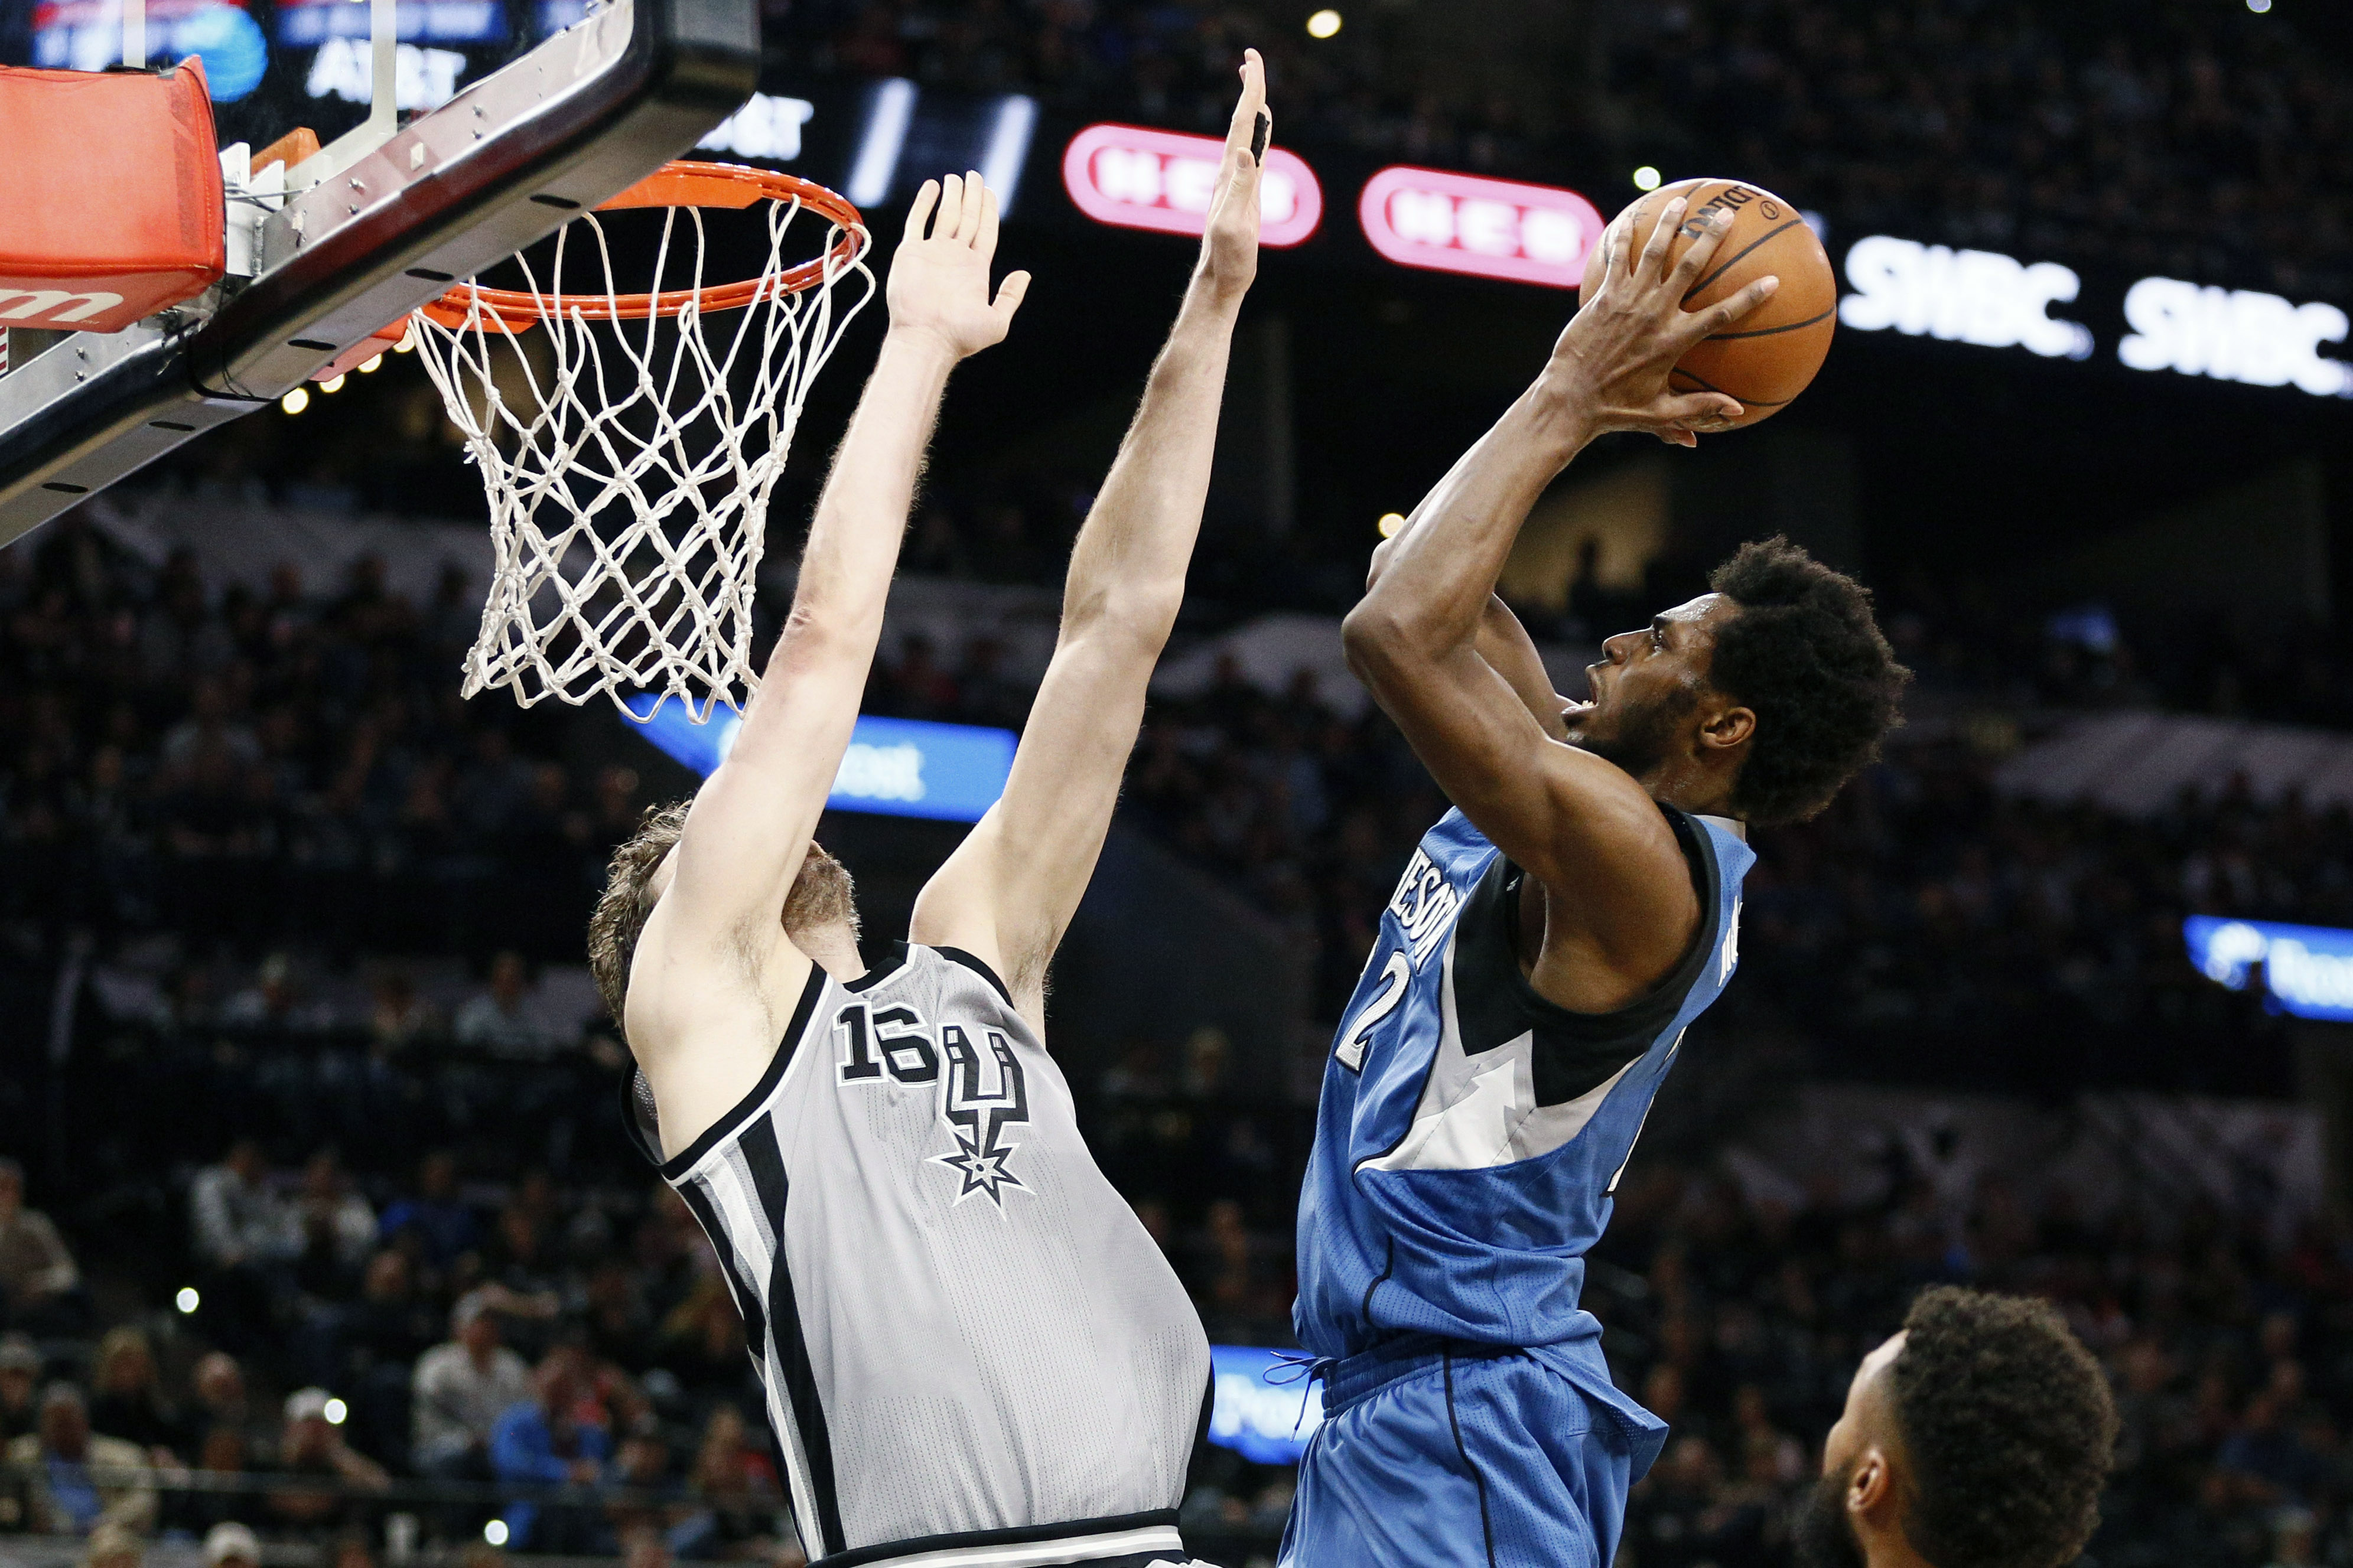 Spurs at Timberwolves live stream: How to watch online